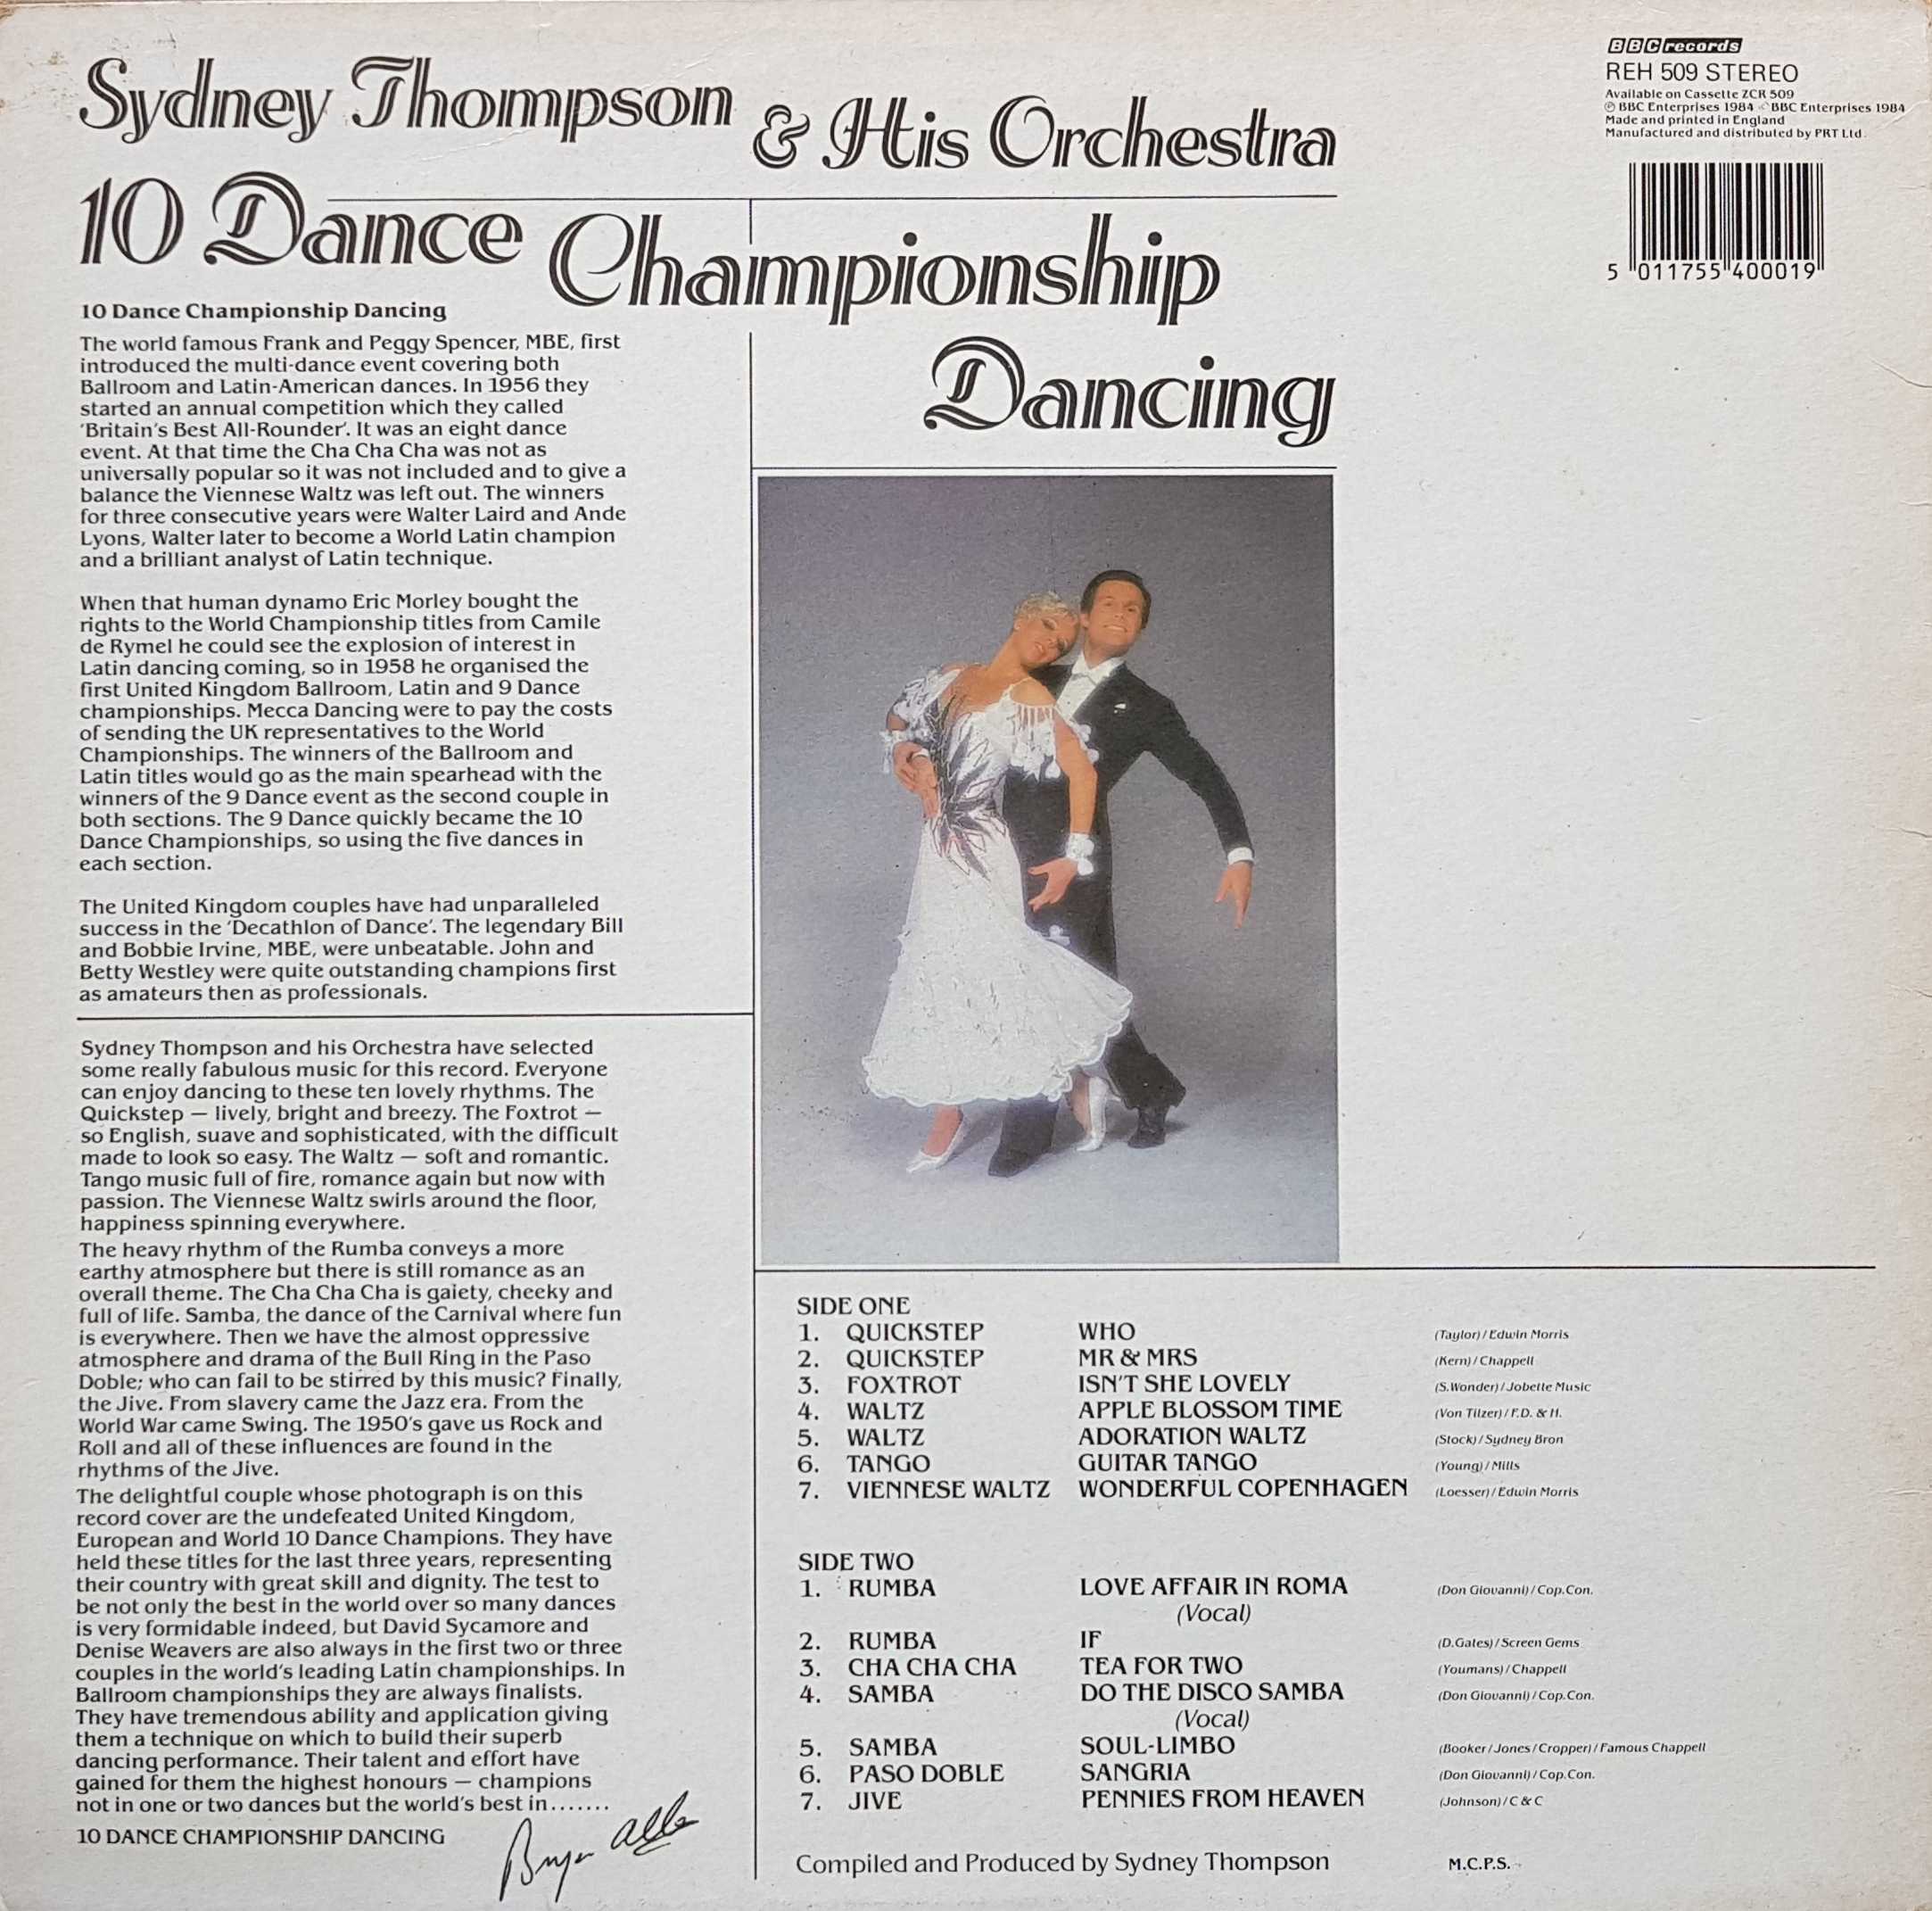 Picture of REH 509 Sydney Thompson - 10 dance championship dancing by artist Various / Sydney Thompson and his orchestra from the BBC records and Tapes library